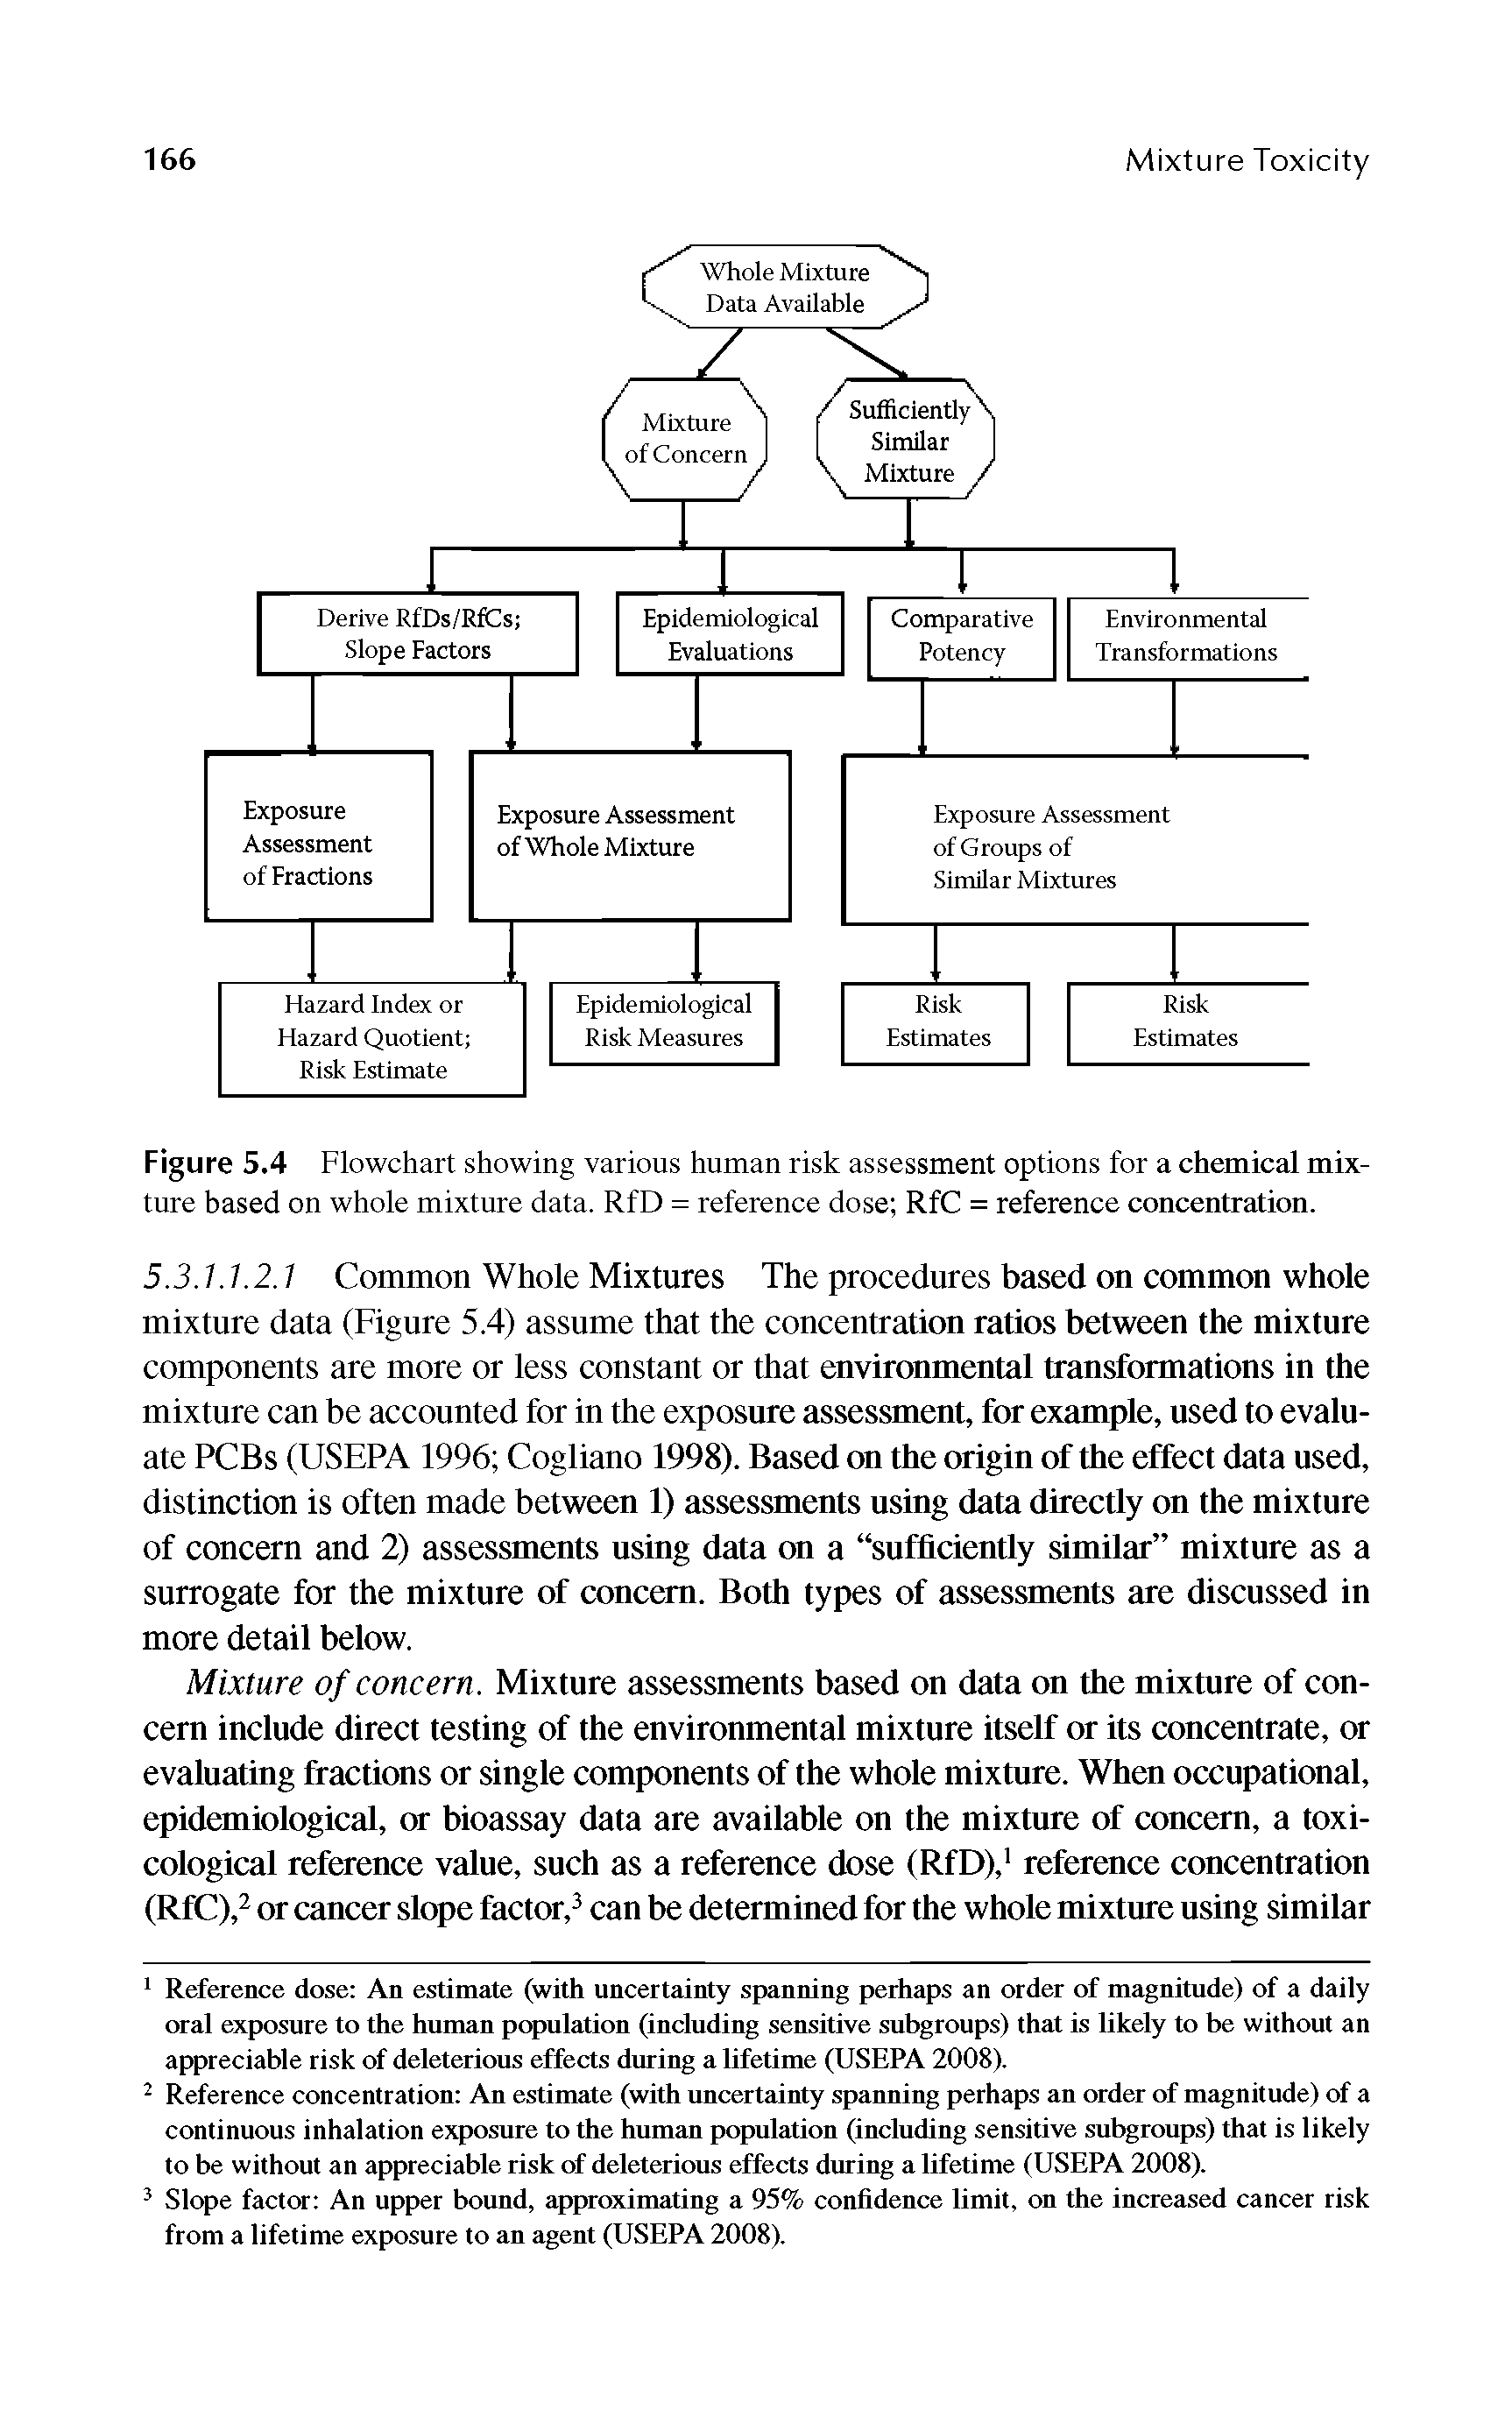 Figure 5.4 Flowchart showing various human risk assessment options for a chemical mixture based on whole mixture data. RfD = reference dose RfC = reference concentration.